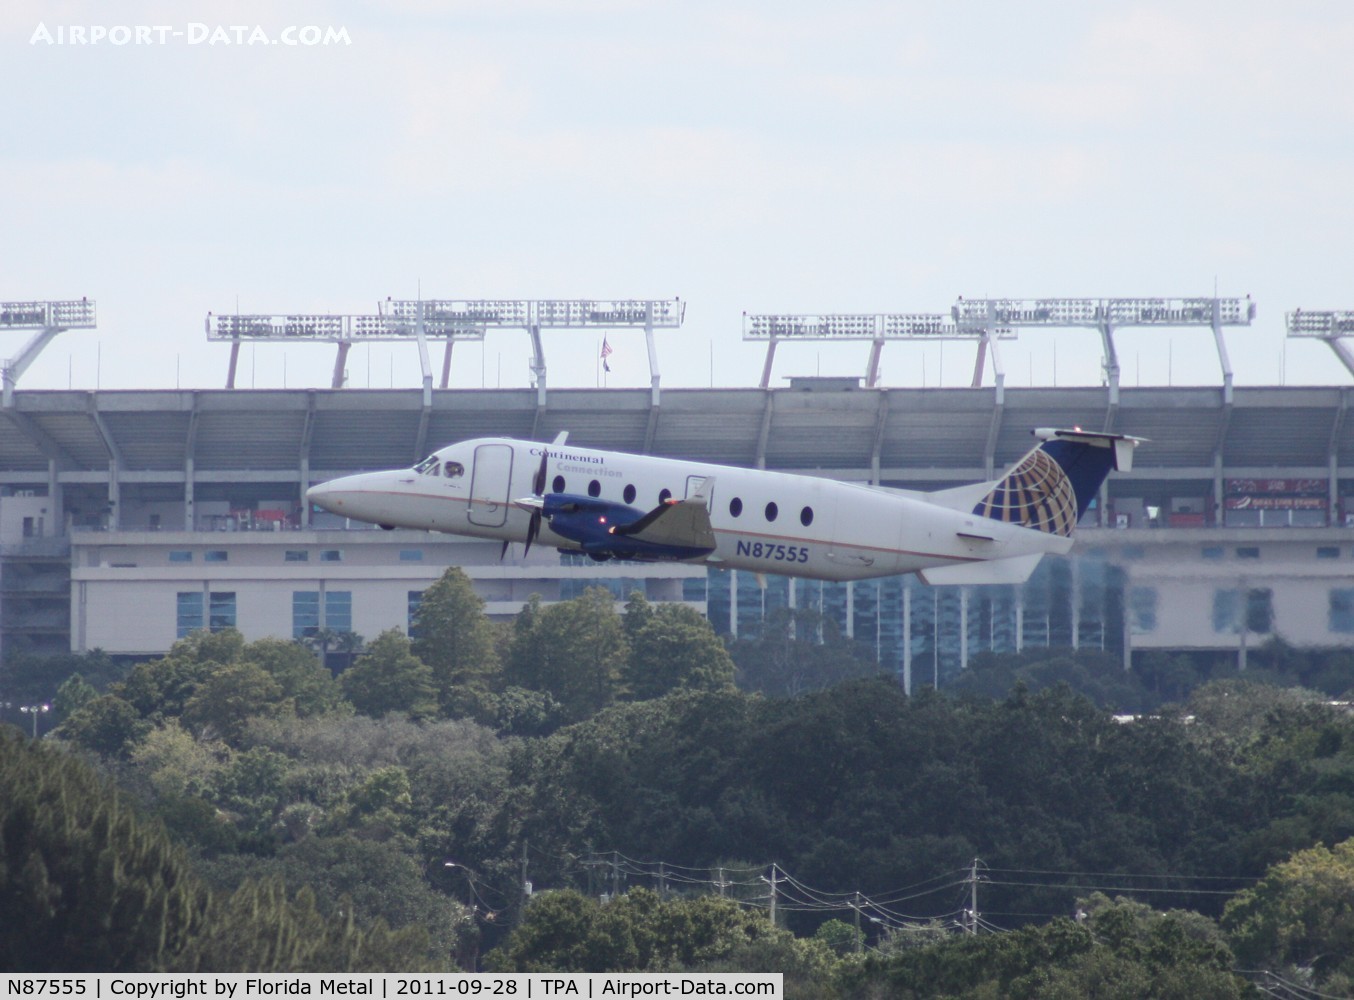 N87555, 1996 Raytheon 1900D C/N UE-234, Continental Connection B1900D in front of Raymond James Stadium